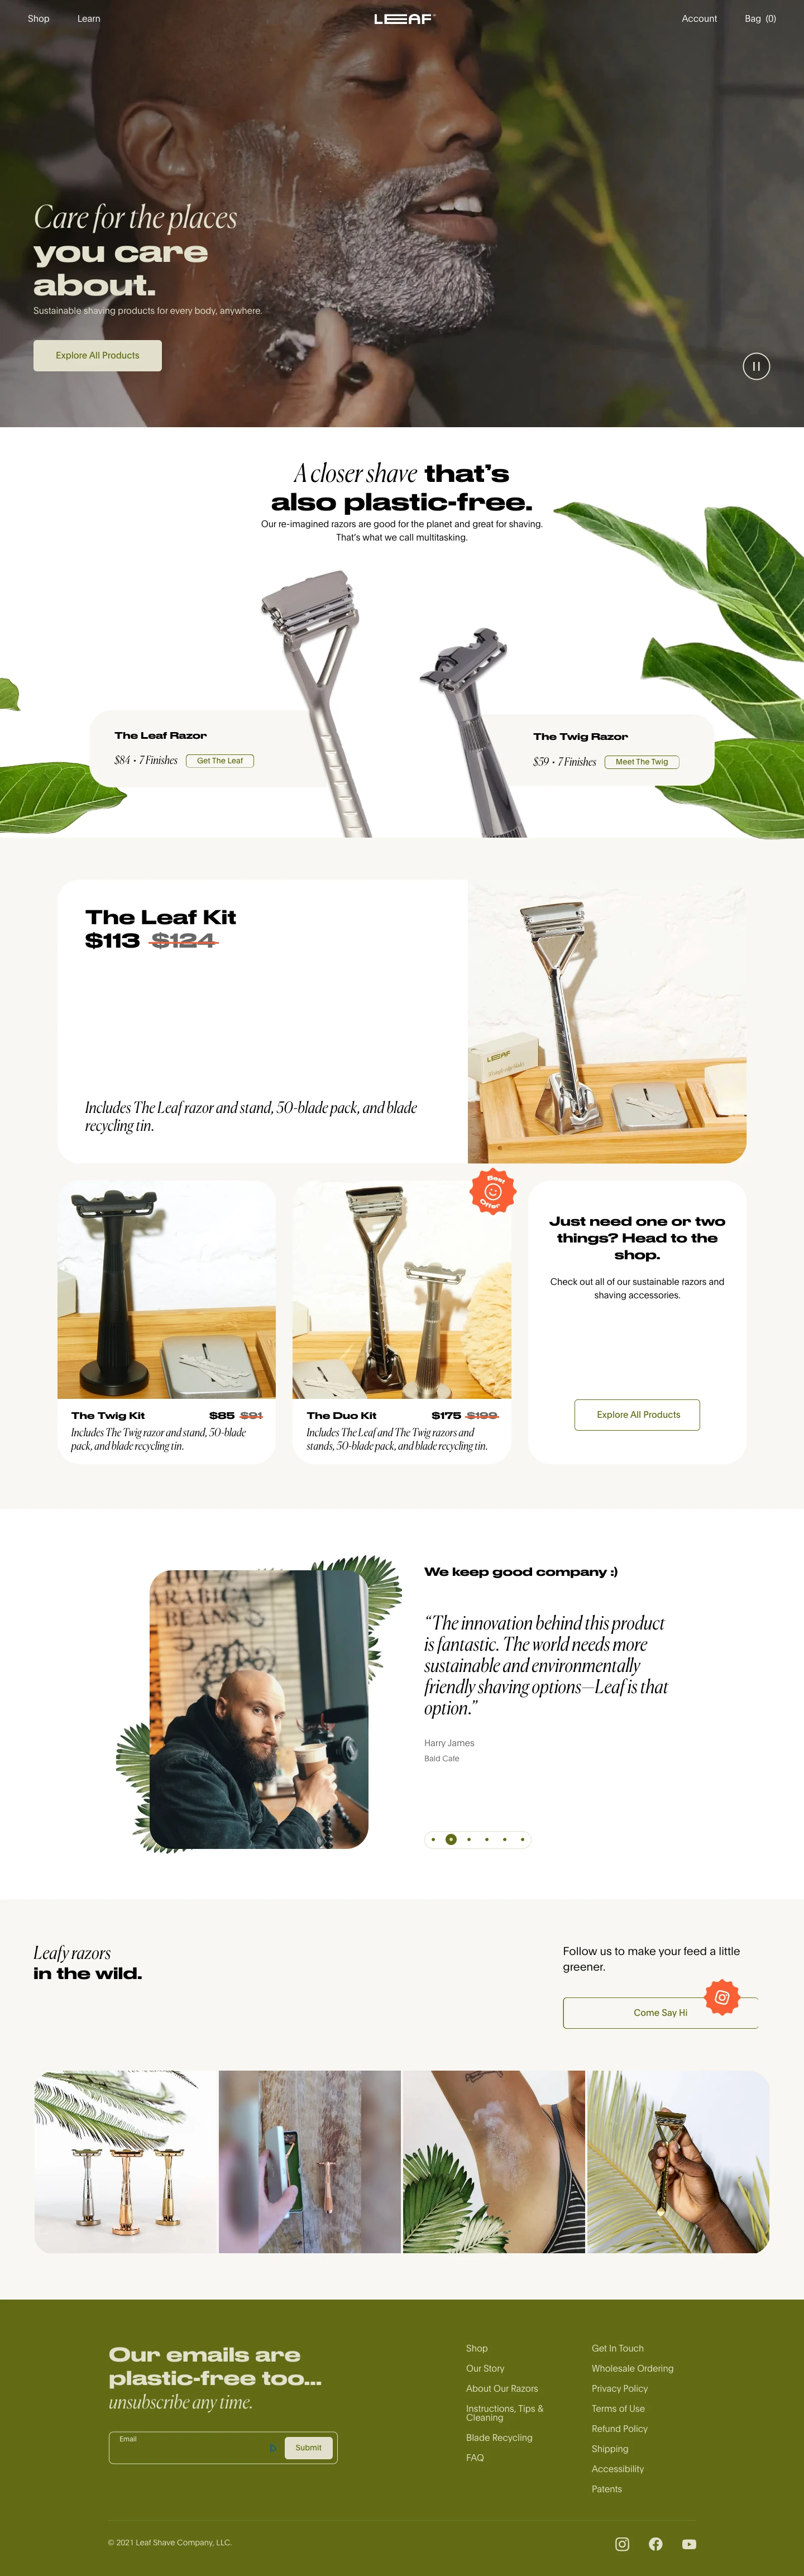 Leaf Shave Landing Page Example: Home of the pivoting-head safety razor, The Leaf. The easiest way to make the swap from plastic razors to all-metal fully recyclable shaving.